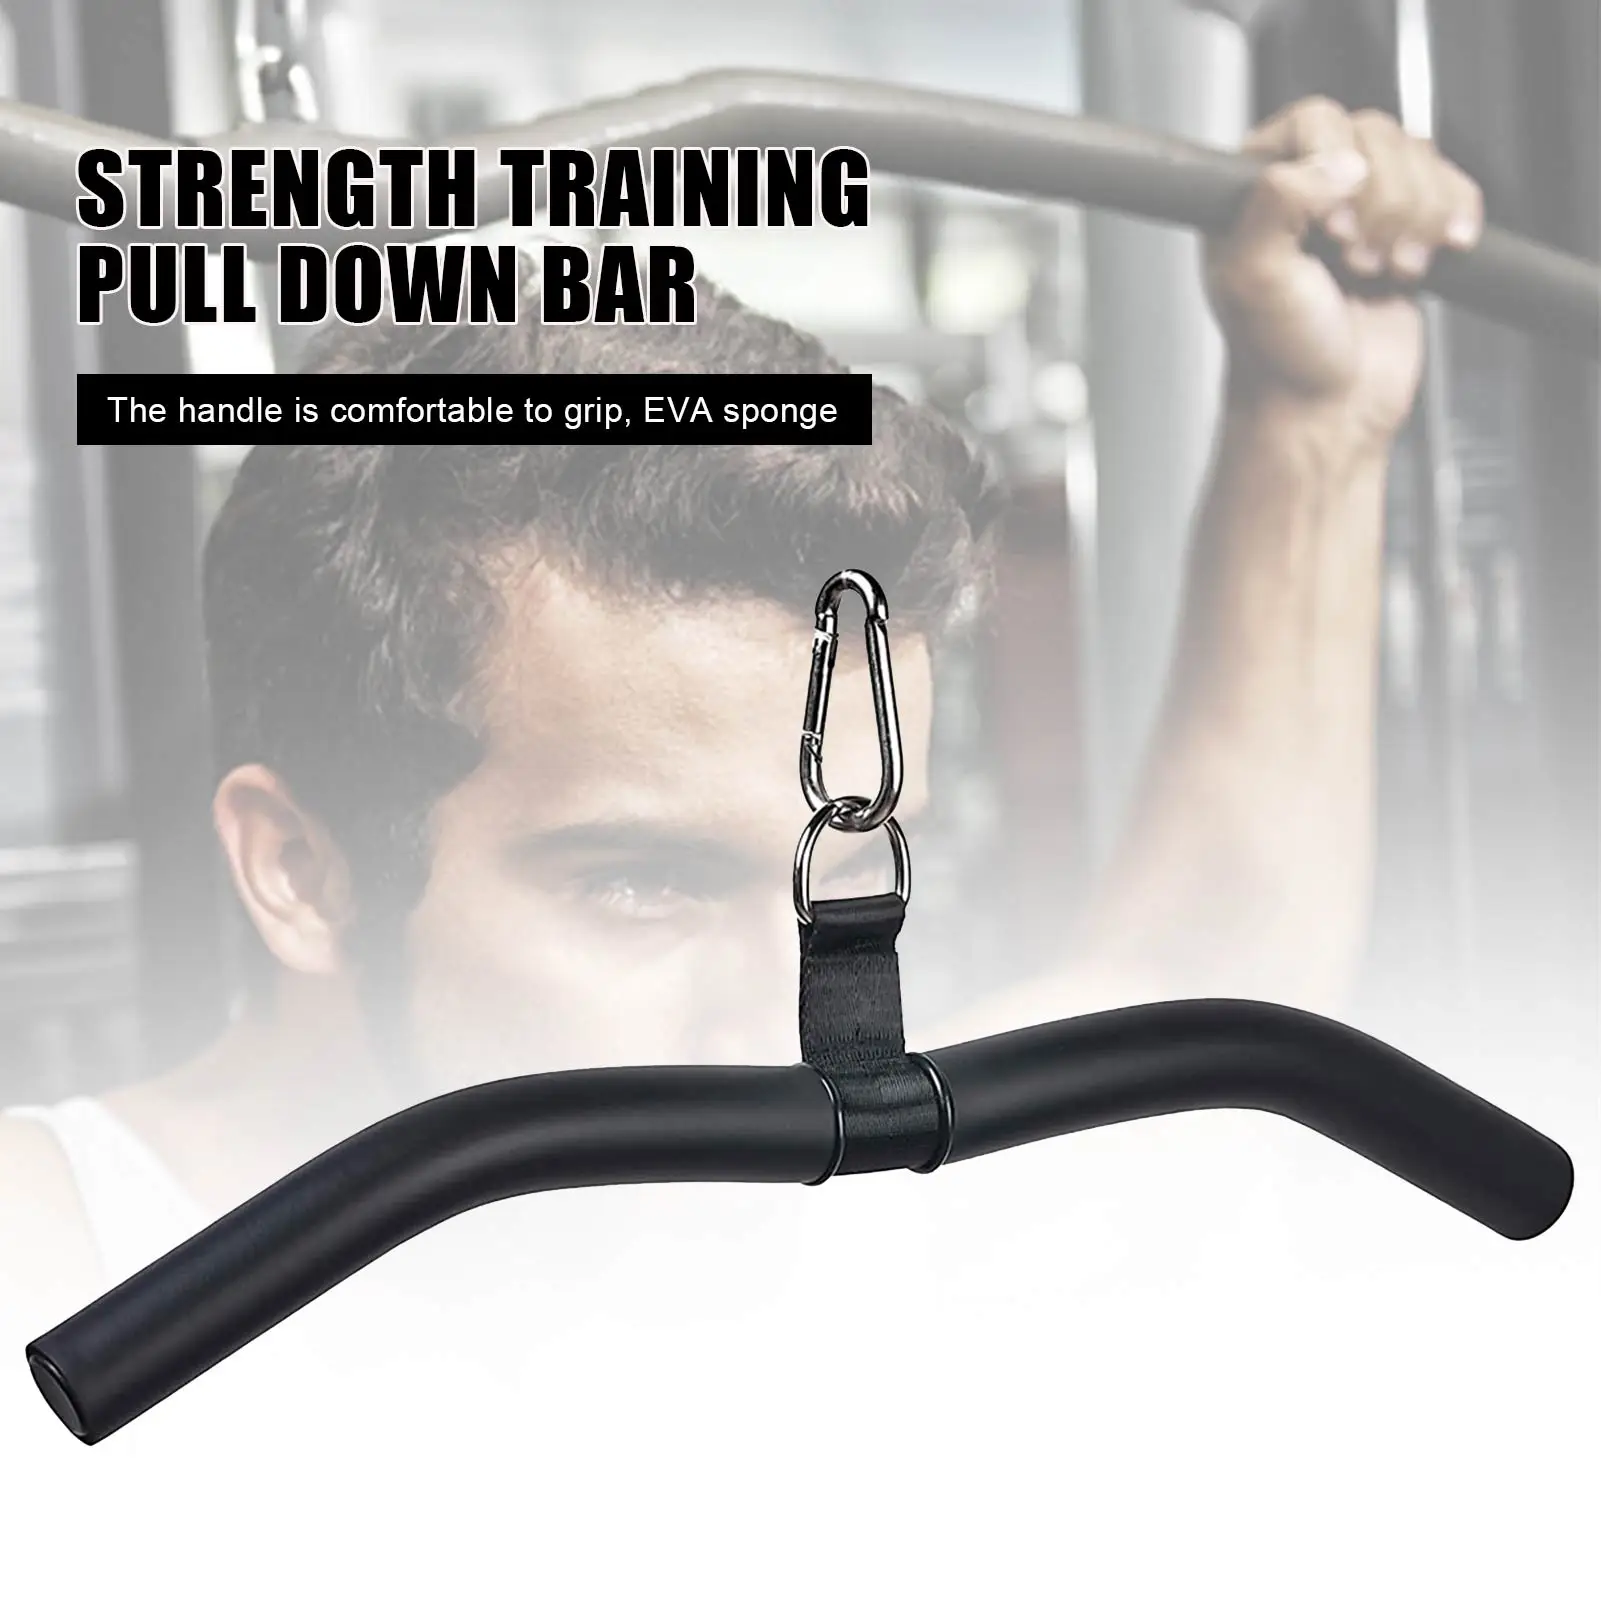 

Lat Pull Down Bar Attachment For Home Gym Workout Seated Rowing Exercise Back Muscles Arm Muscles Accessories For Pulley System